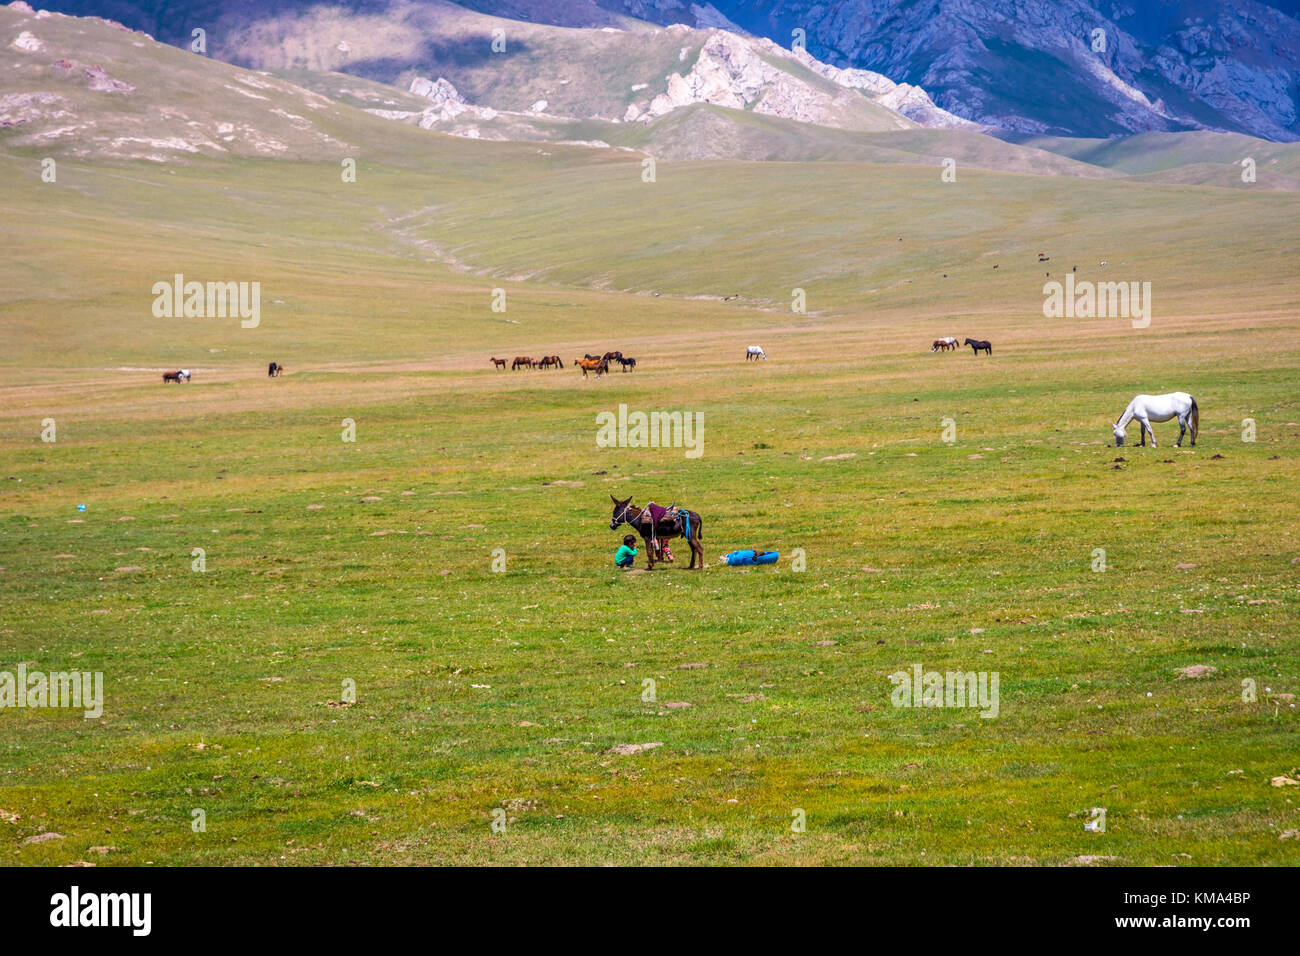 SONG KUL, KYRGYZSTAN - AUGUST 11: Kid guiding a donkey over green pasture next to Song Kul lake. August 2016 Stock Photo